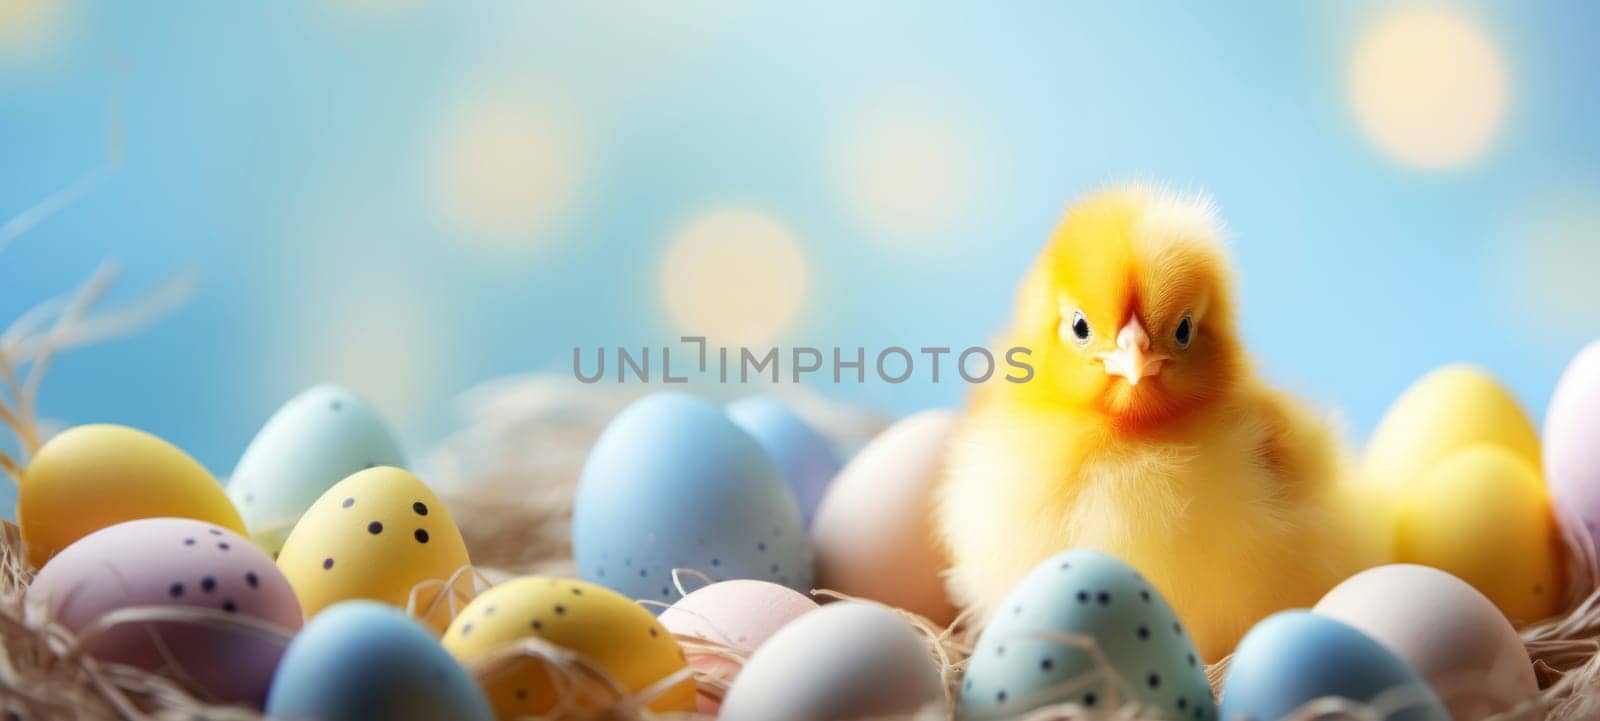 A fluffy yellow chick sits amidst colorful speckled Easter eggs, symbolizing spring and festivity.